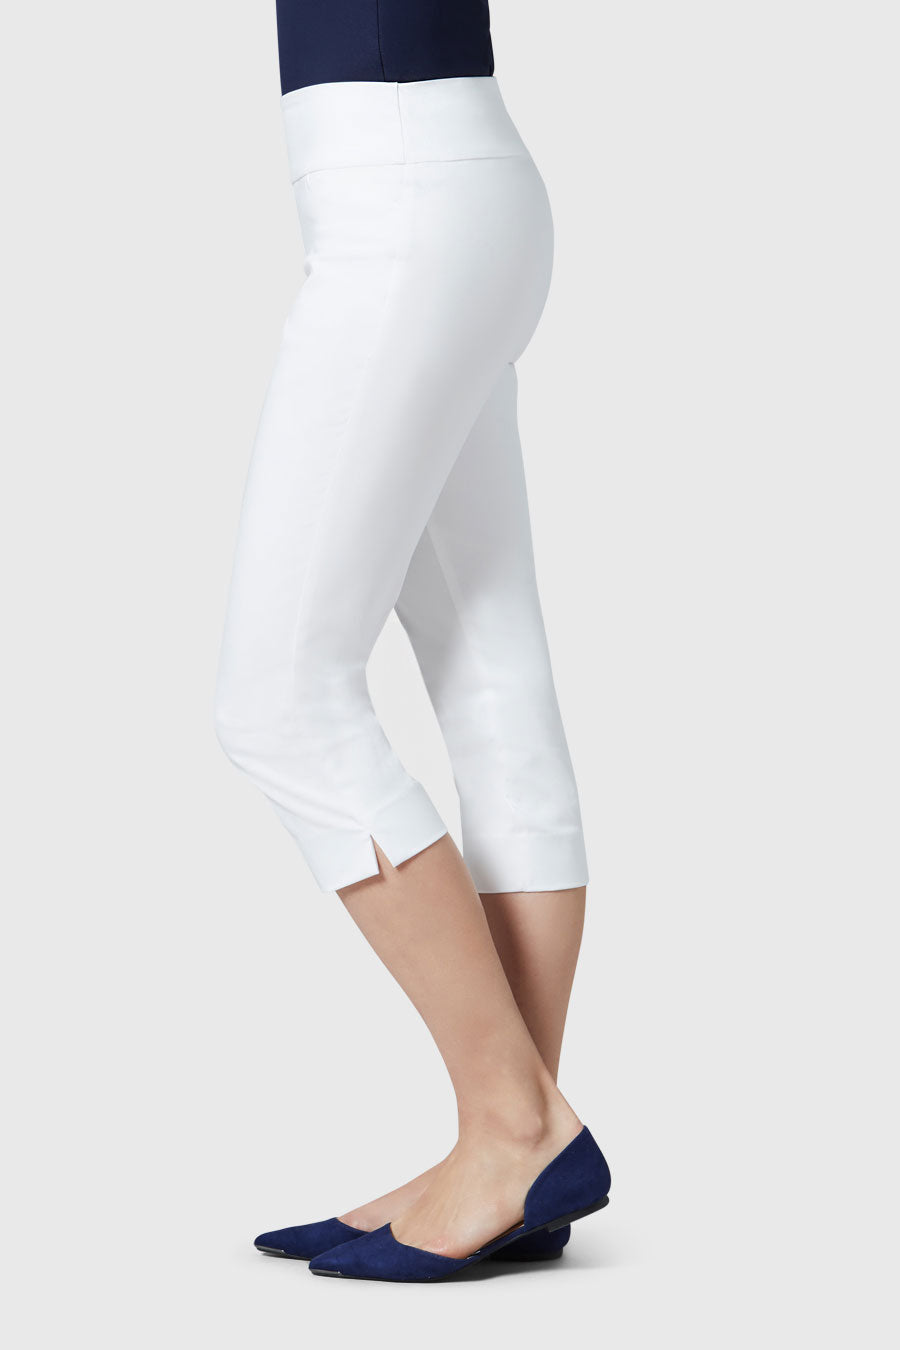 Lisette L Montreal Jupiter Stretch Capri with Pockets – Evelyn and